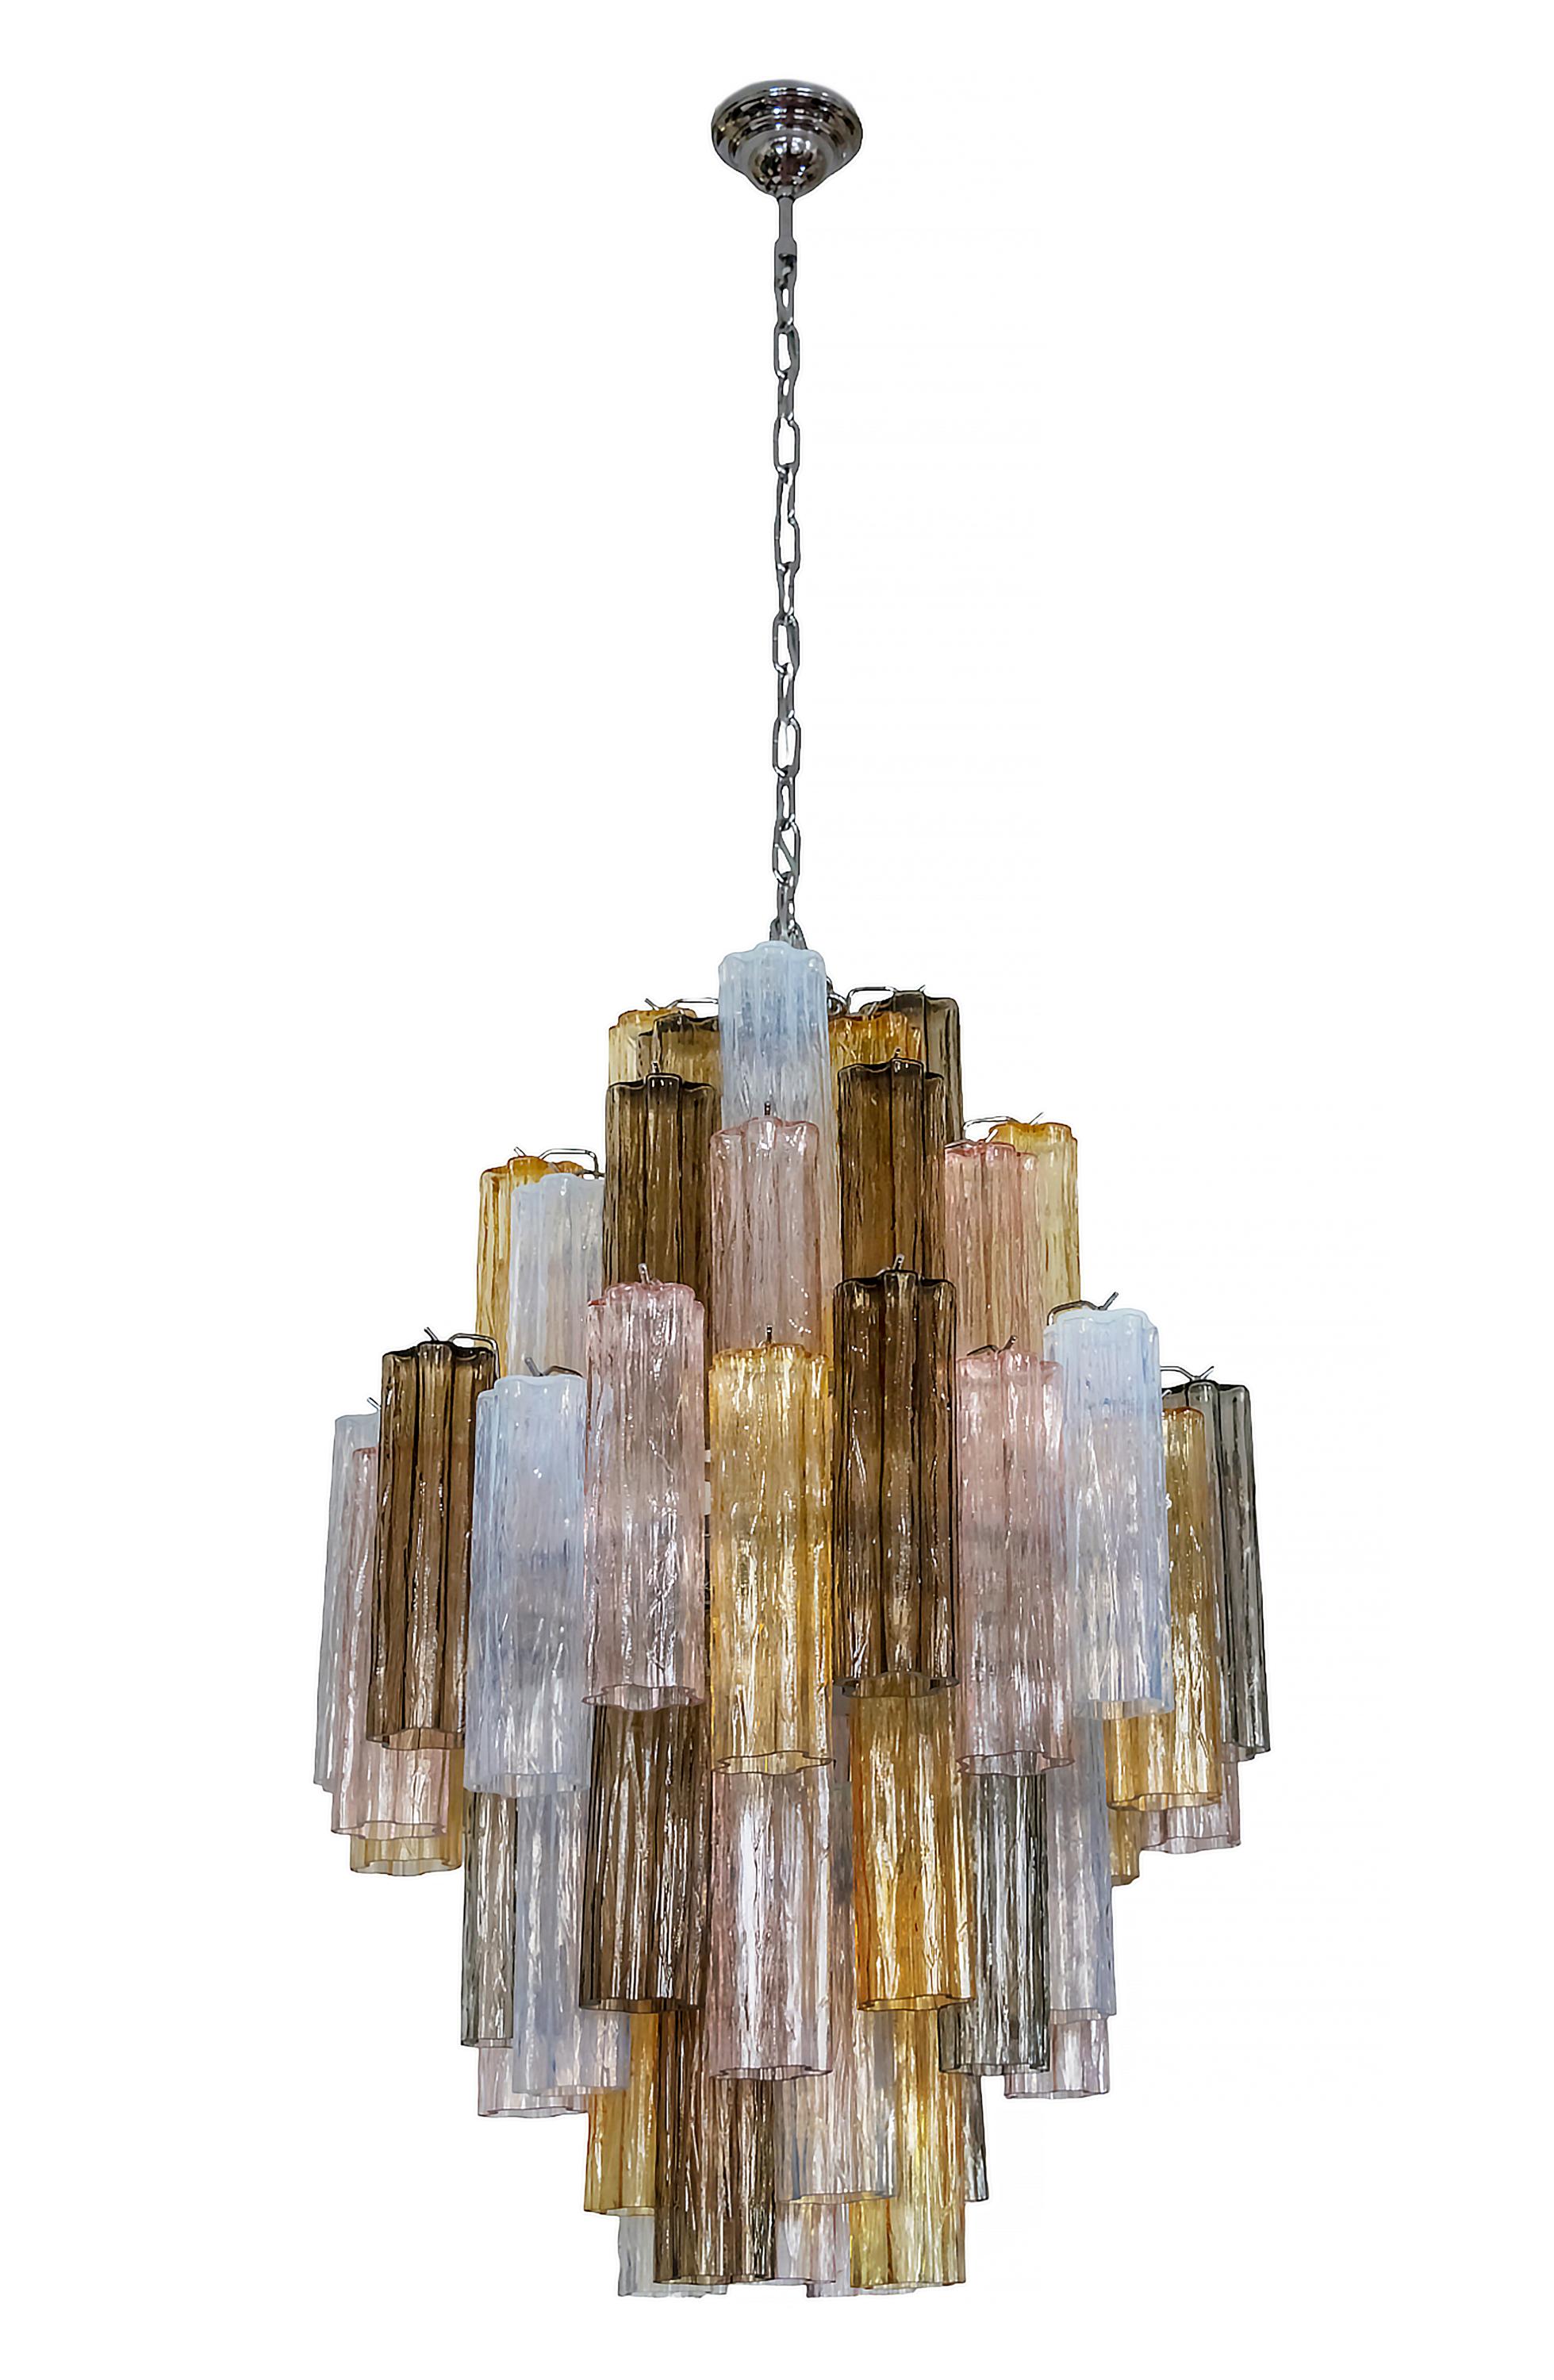 Italian handmade Murano glass chandelier.
The design of this chandelier is made in chrome base with Tubi Tronchi form colour Murano glass elements. 
Includes 9  pcs. E14 bulbs. 
Its is in a very good/excellent condition.
Without chain height is 95